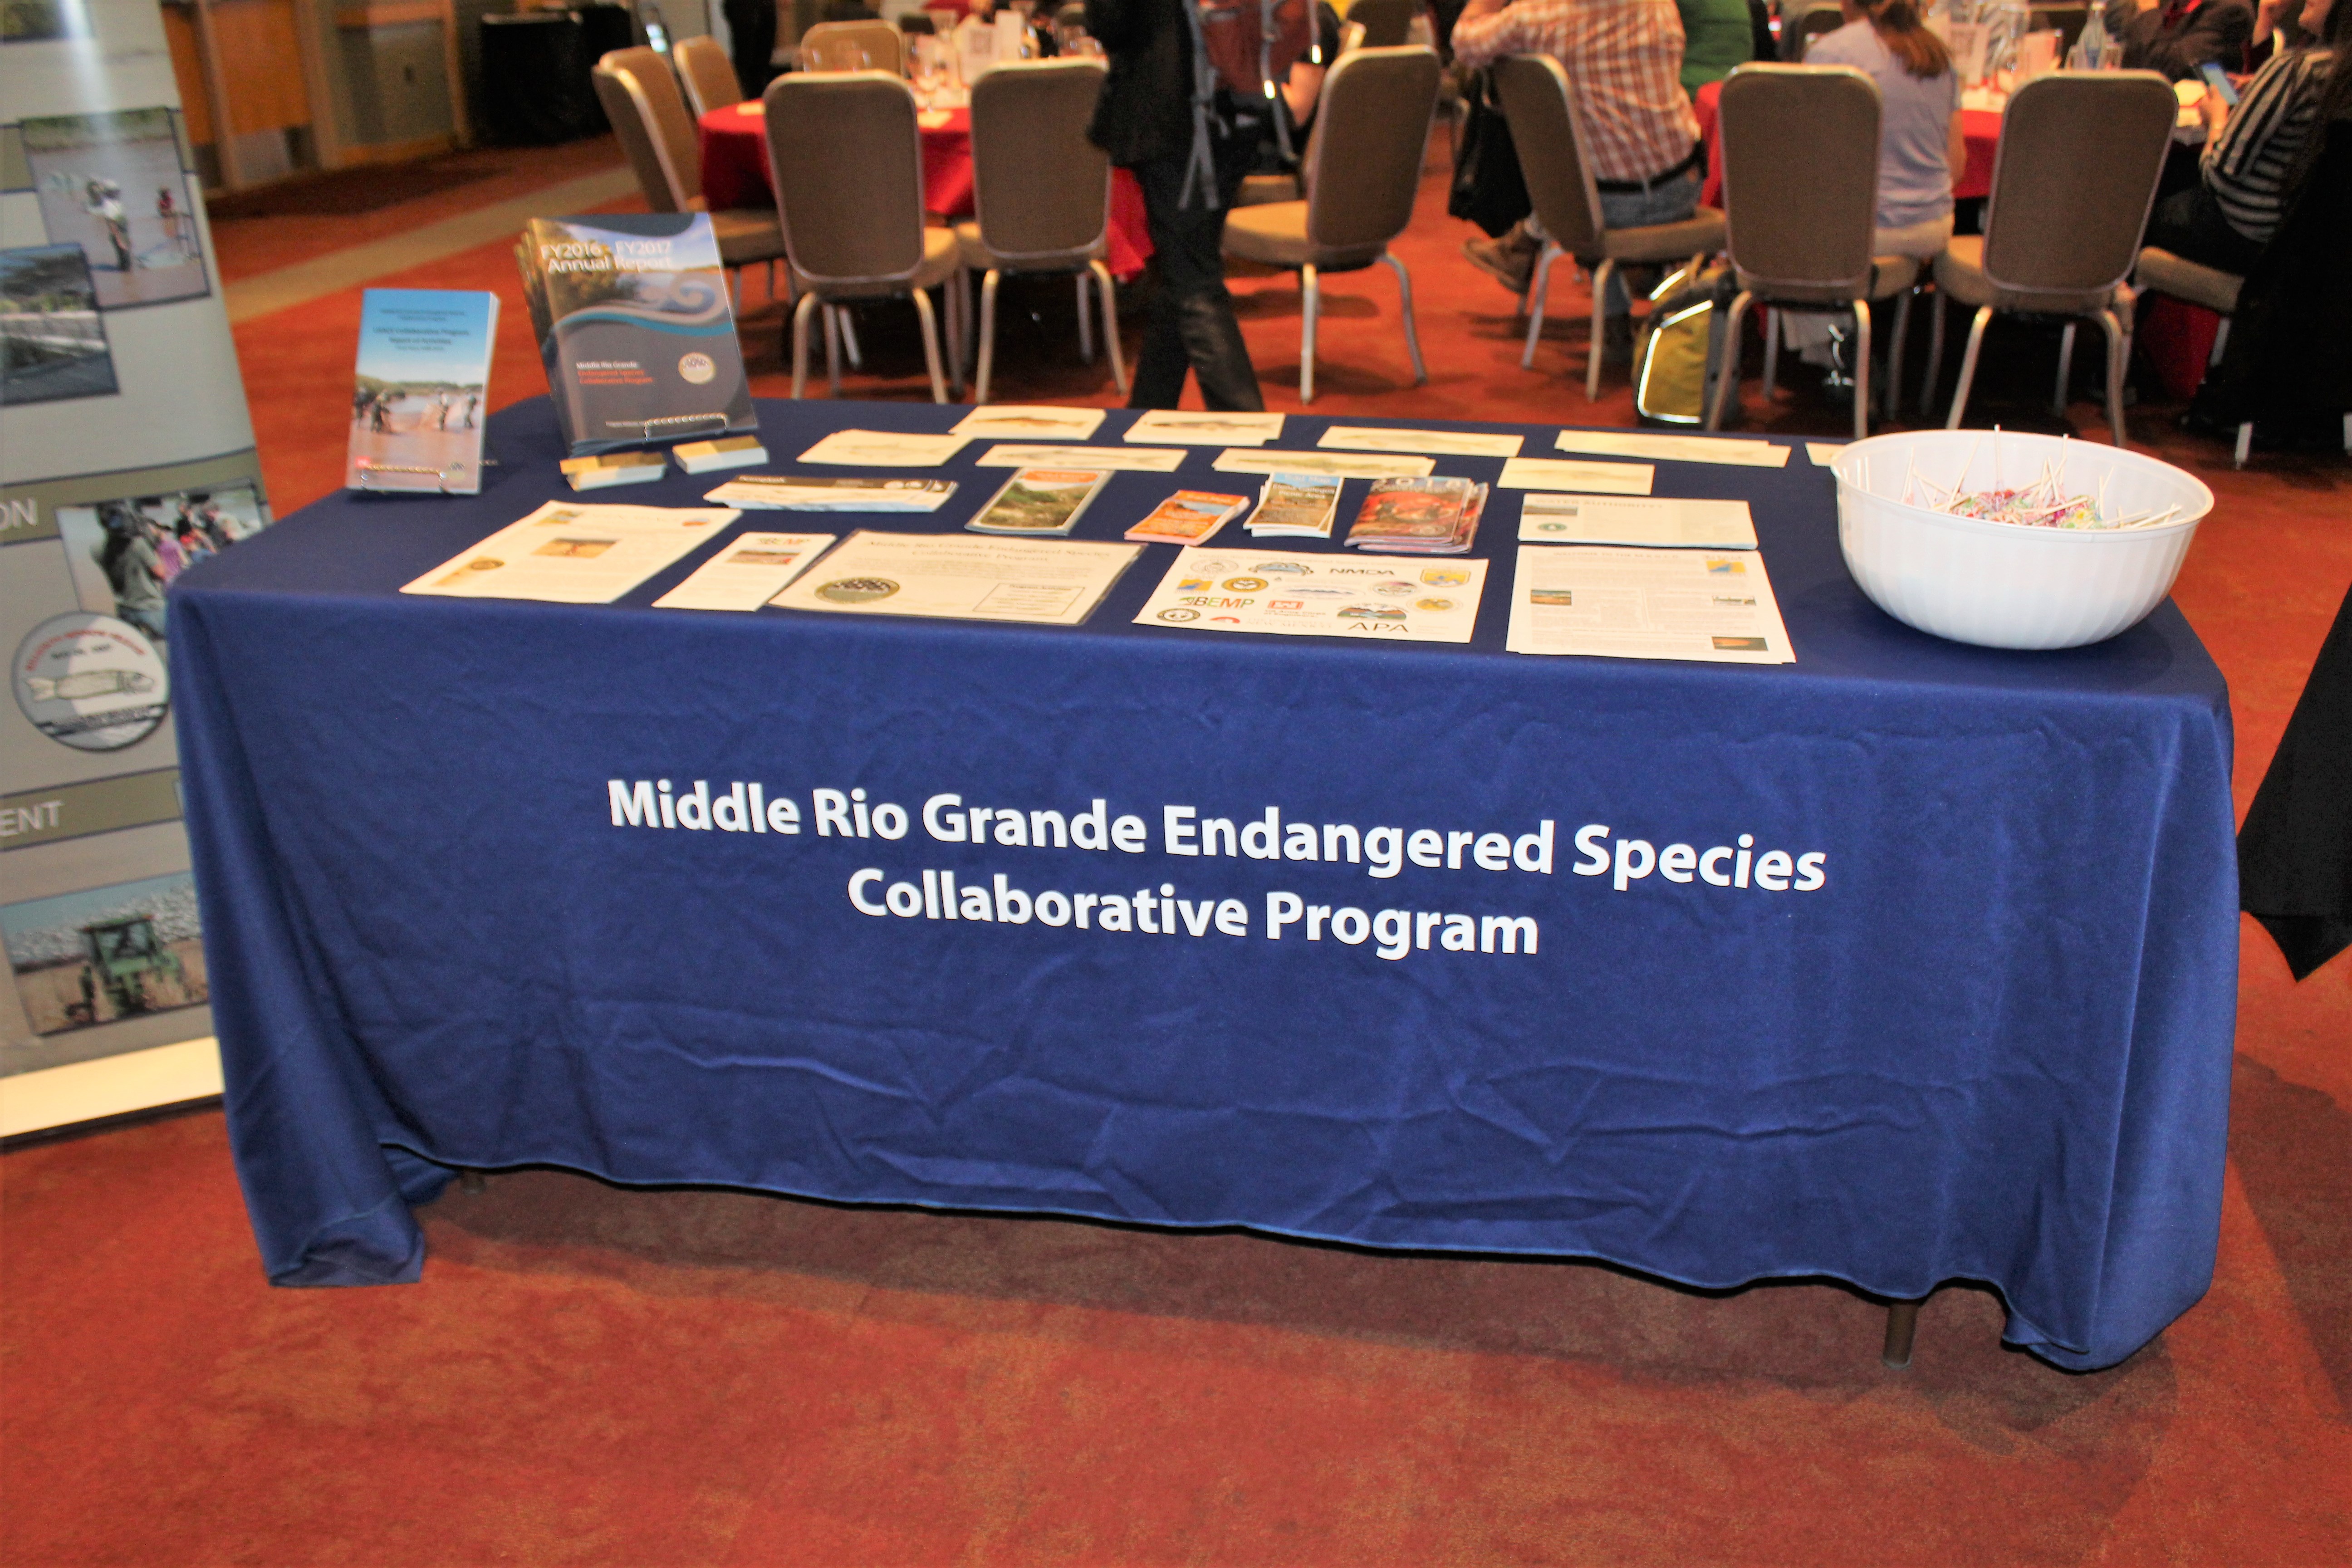 Middle Rio Grande Endangered Species Collaborative Program (MRGESCP) at the poster session.